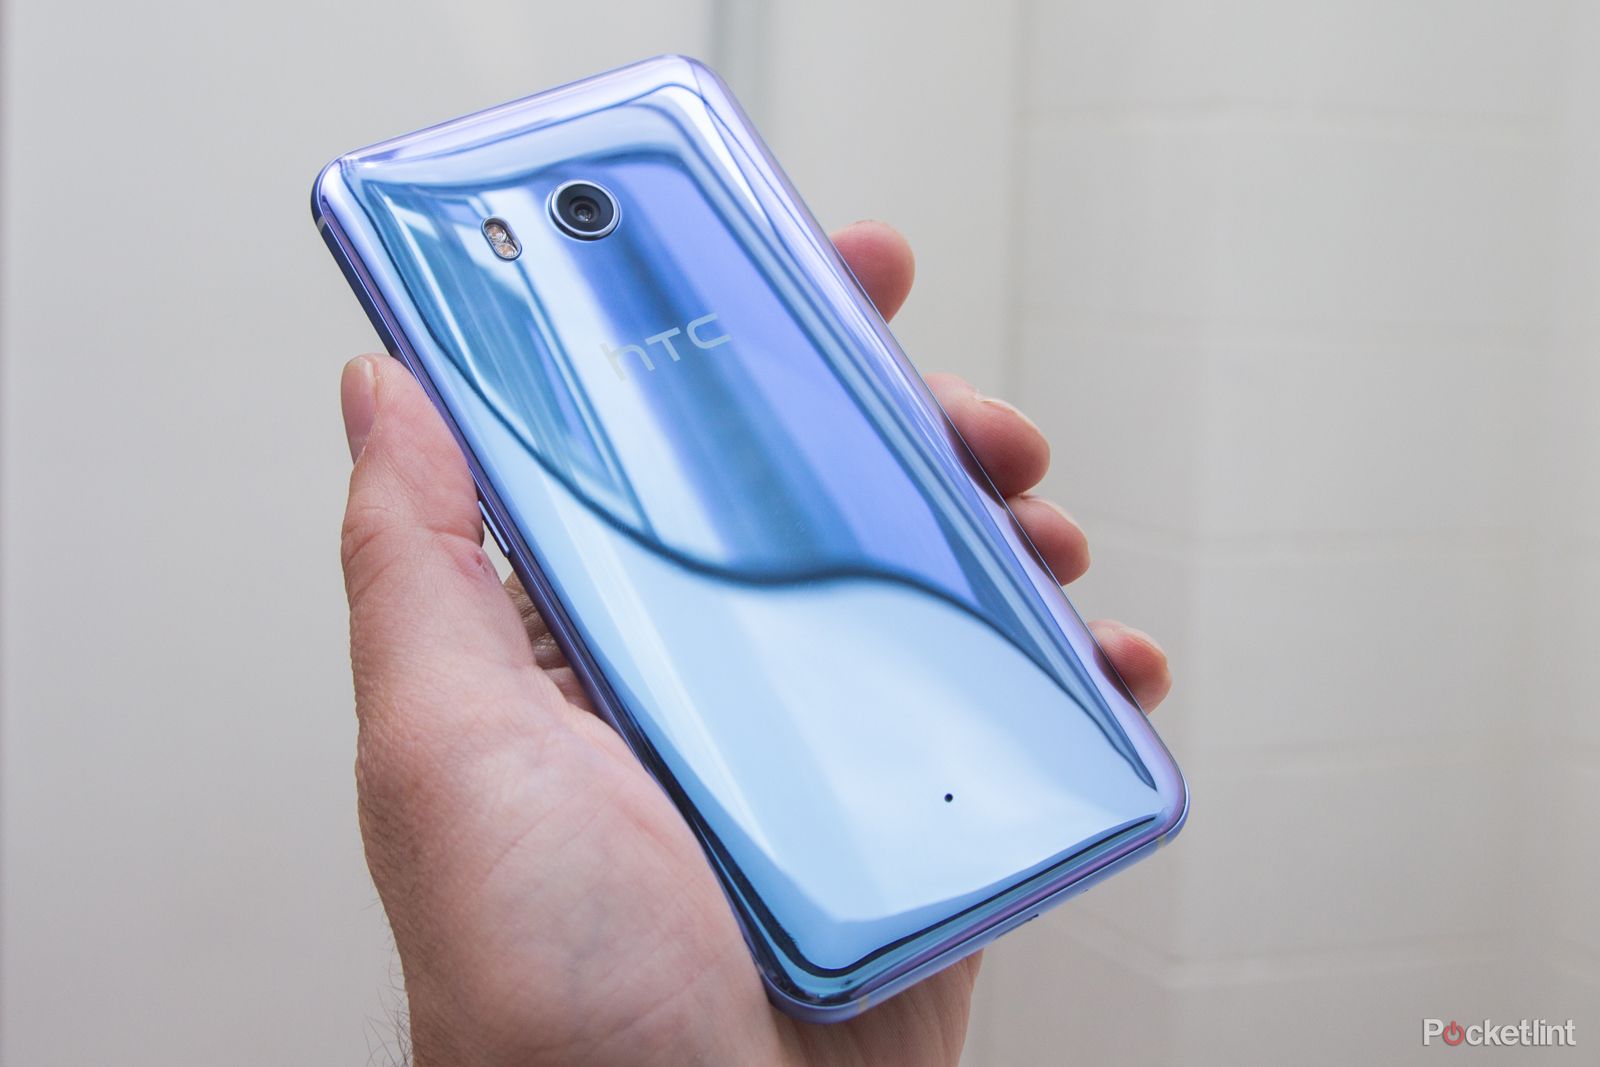 HTC U11 Plus could have a translucent back and HTC has already shown it off image 1